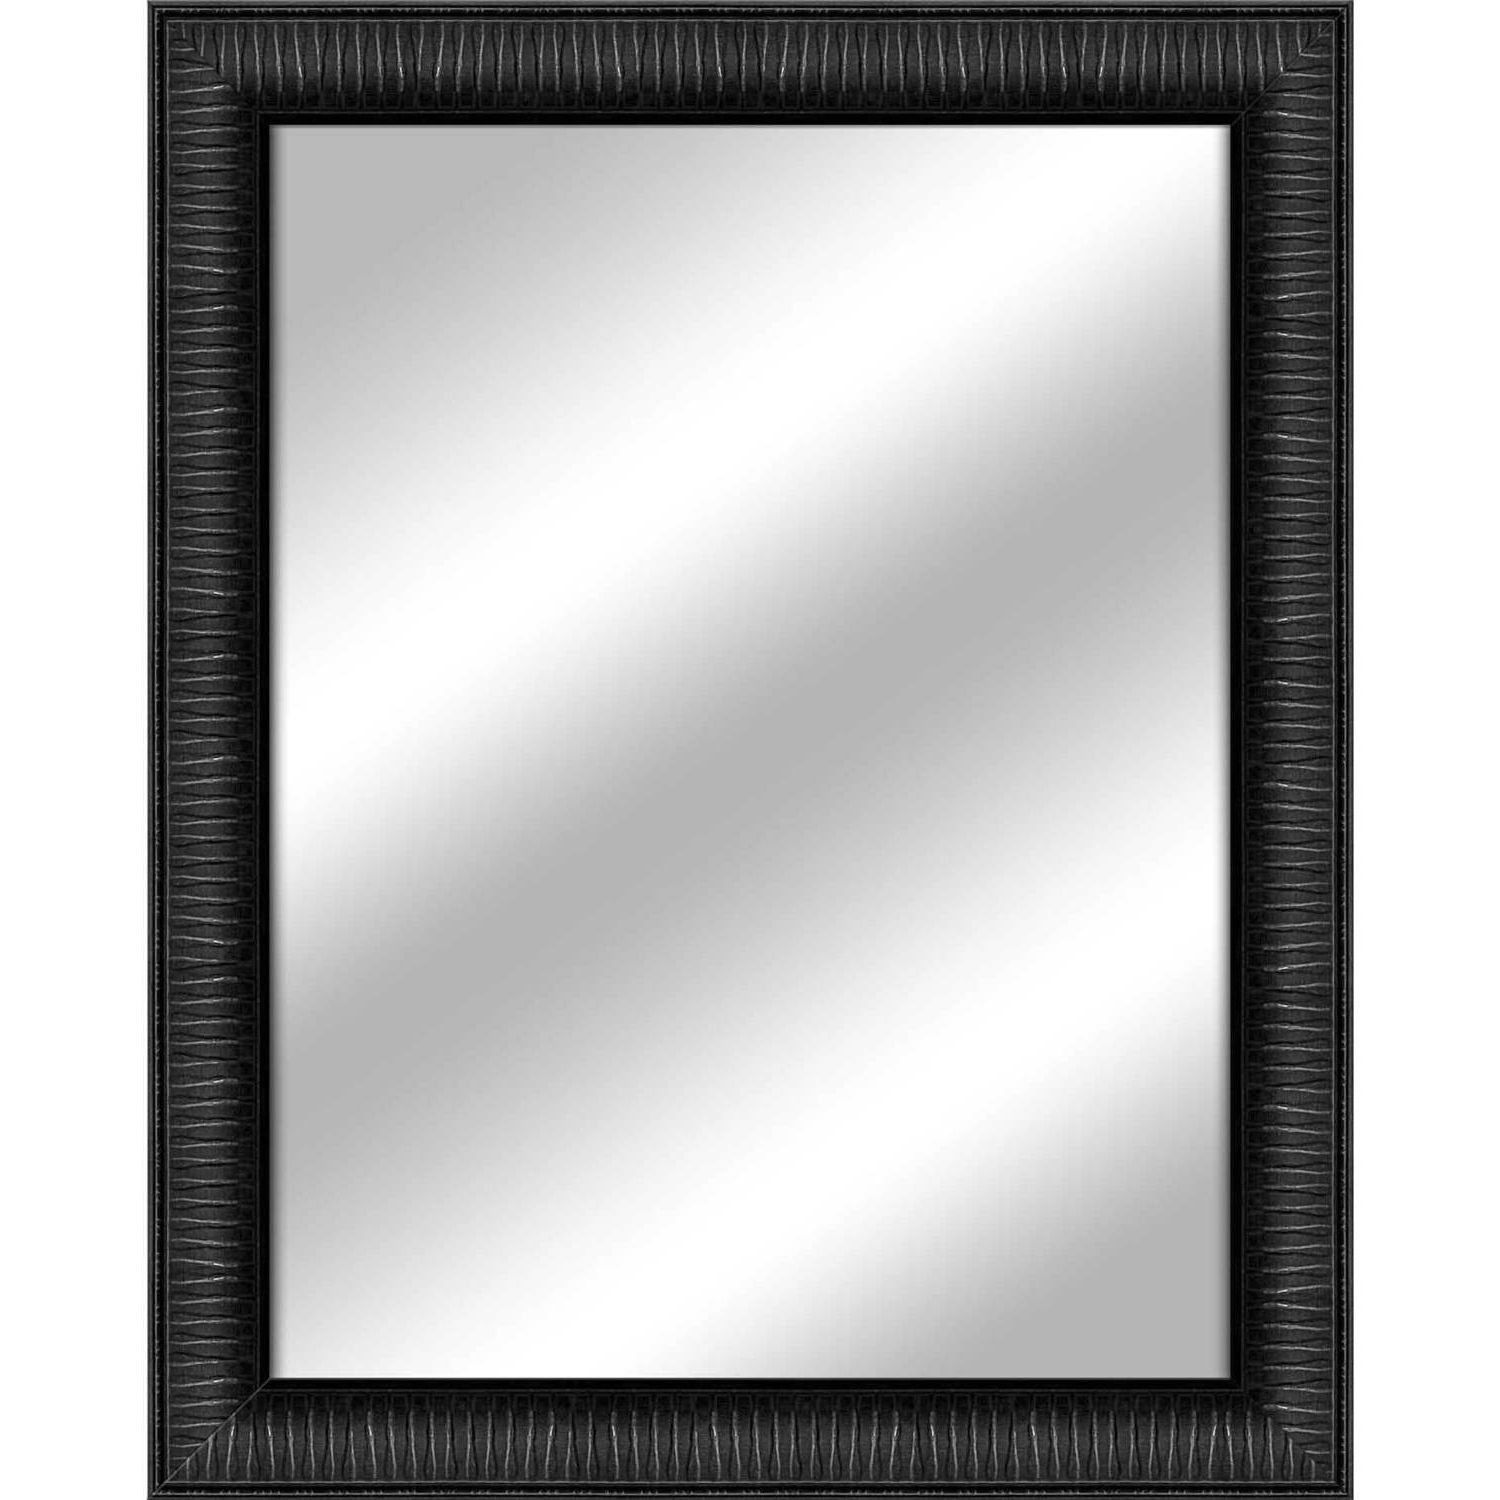 Ptm Images Forte Ready To Hang Framed Mirror, Wood Grain Black Intended For Favorite Black Wood Wall Mirrors (View 12 of 15)